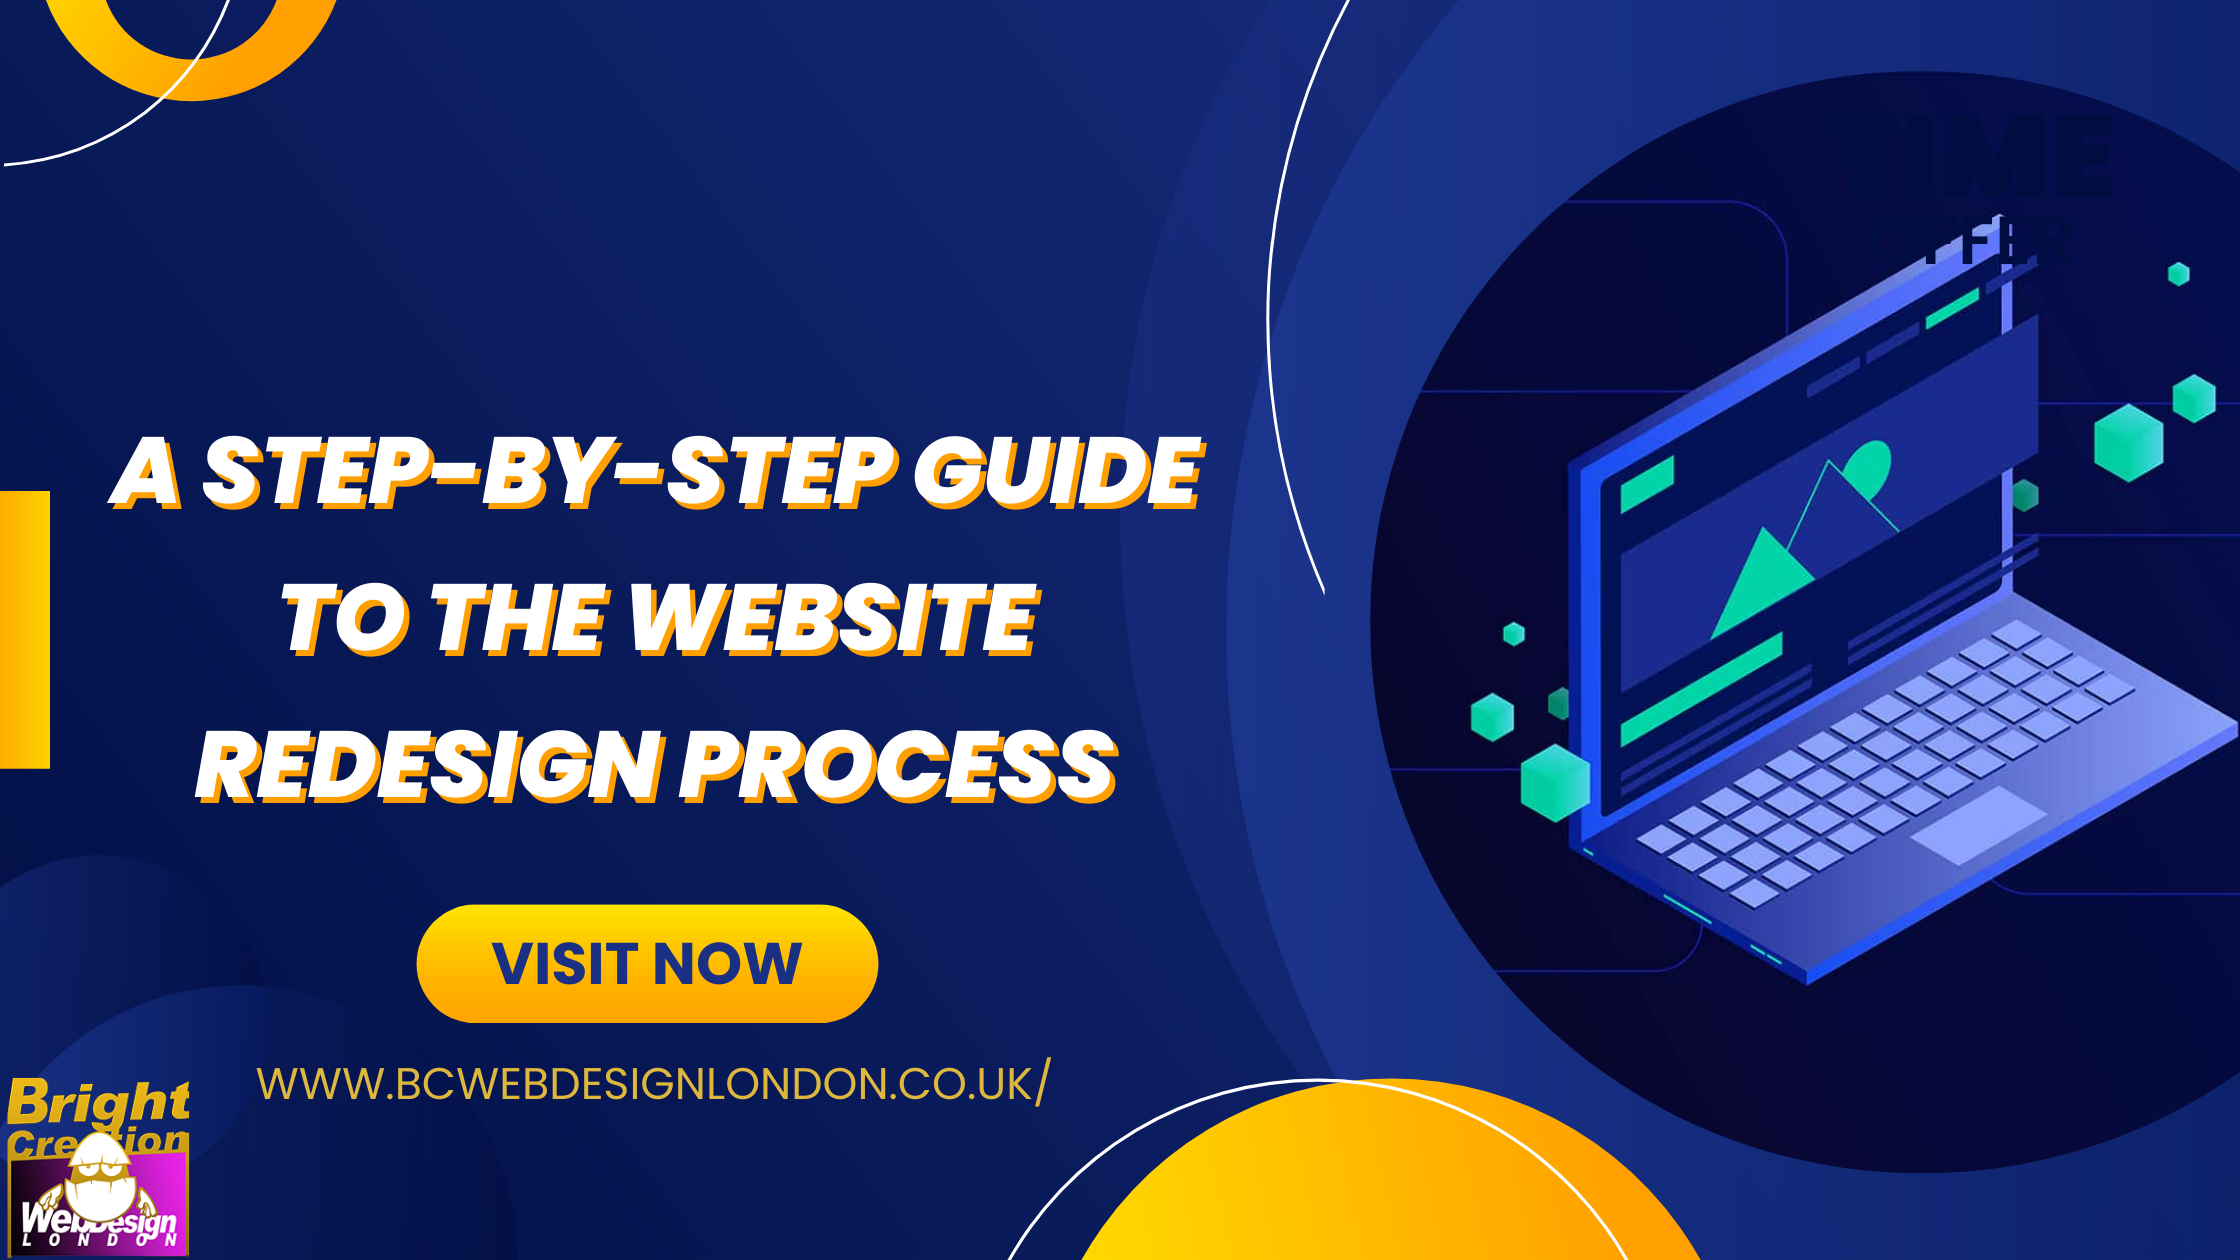 A Step-by-Step Guide To The Website Redesign Process